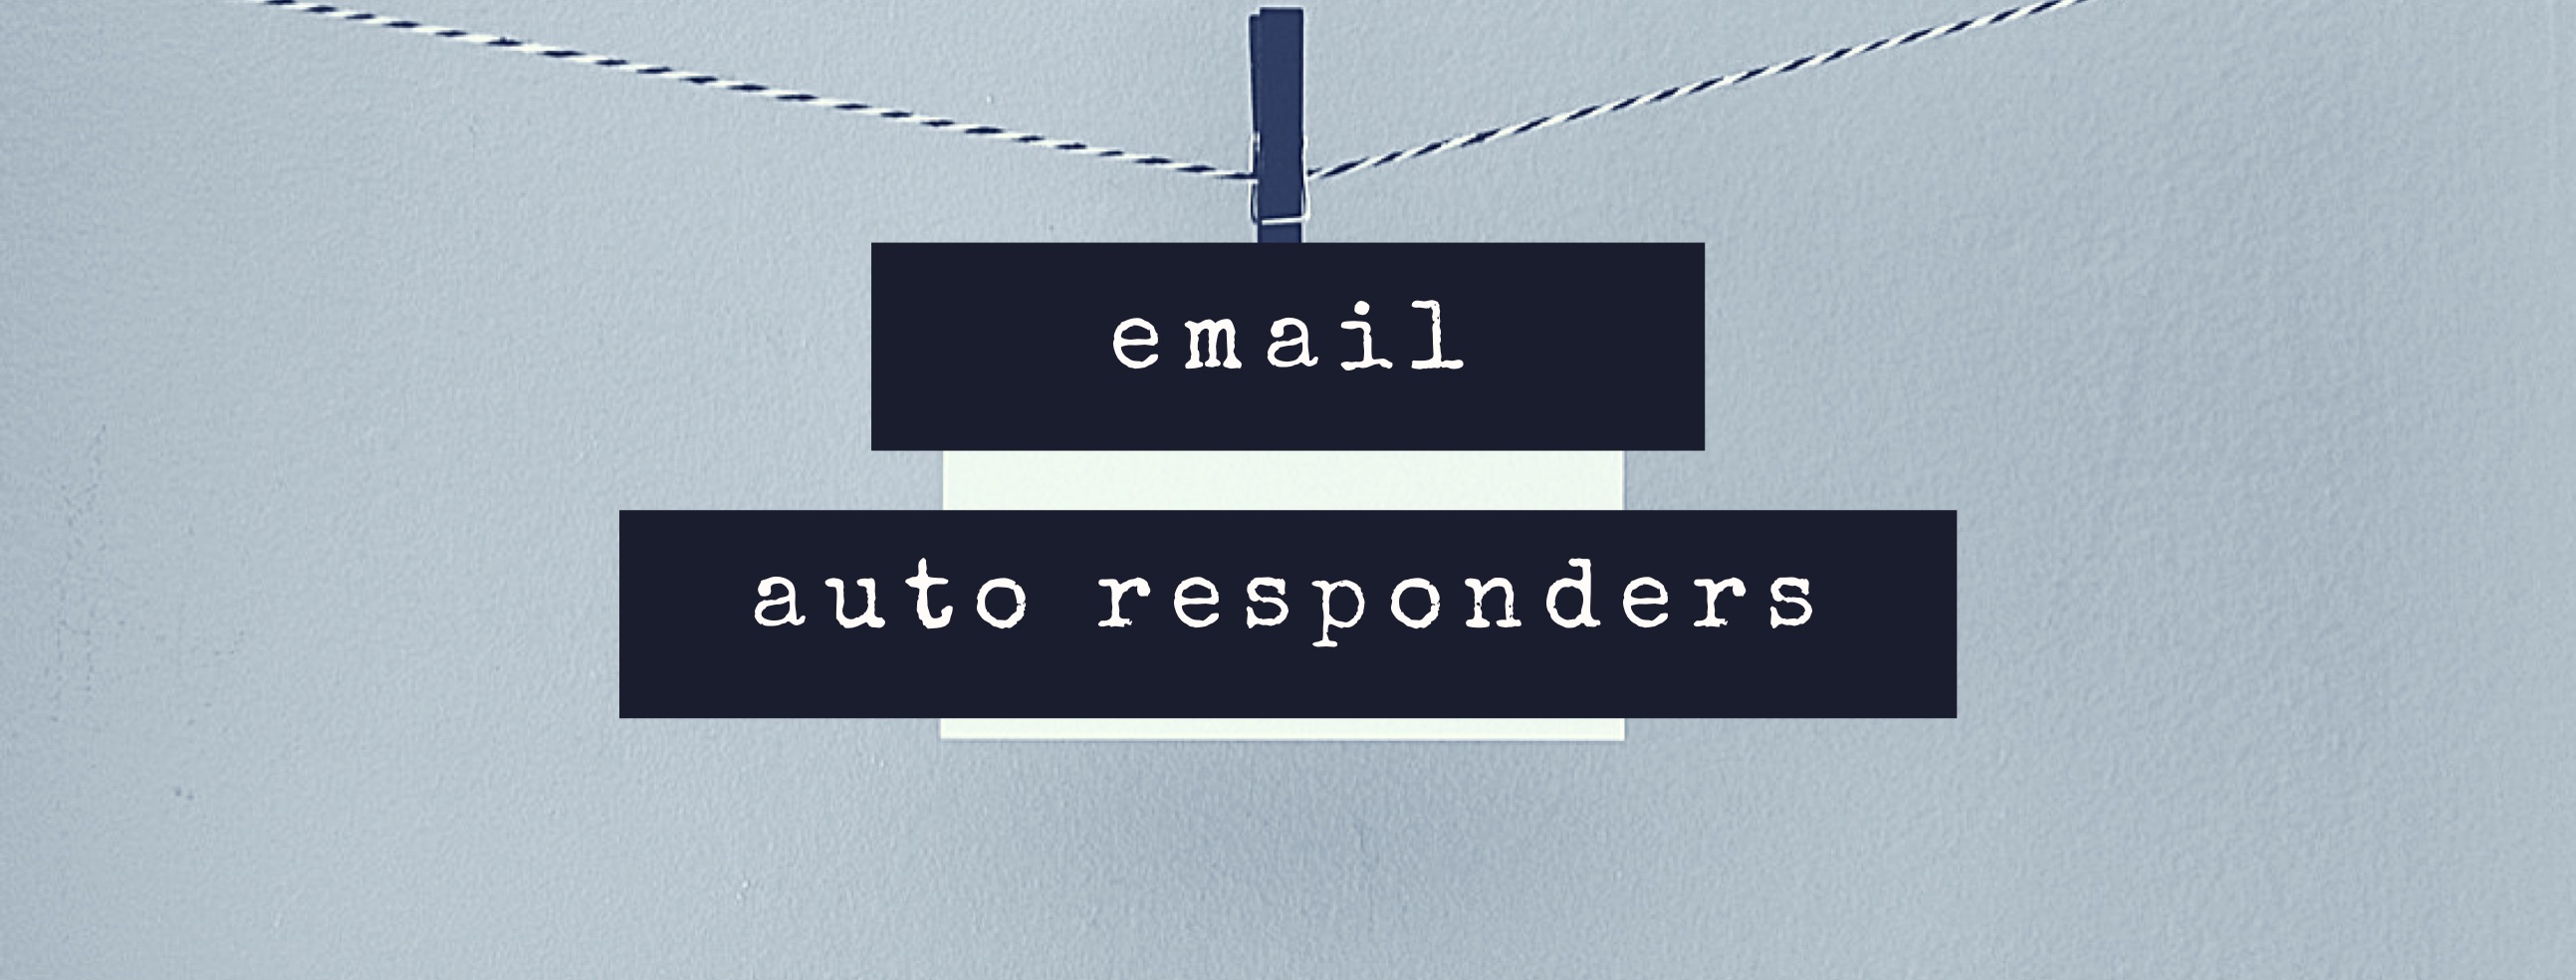 what are email auto responders